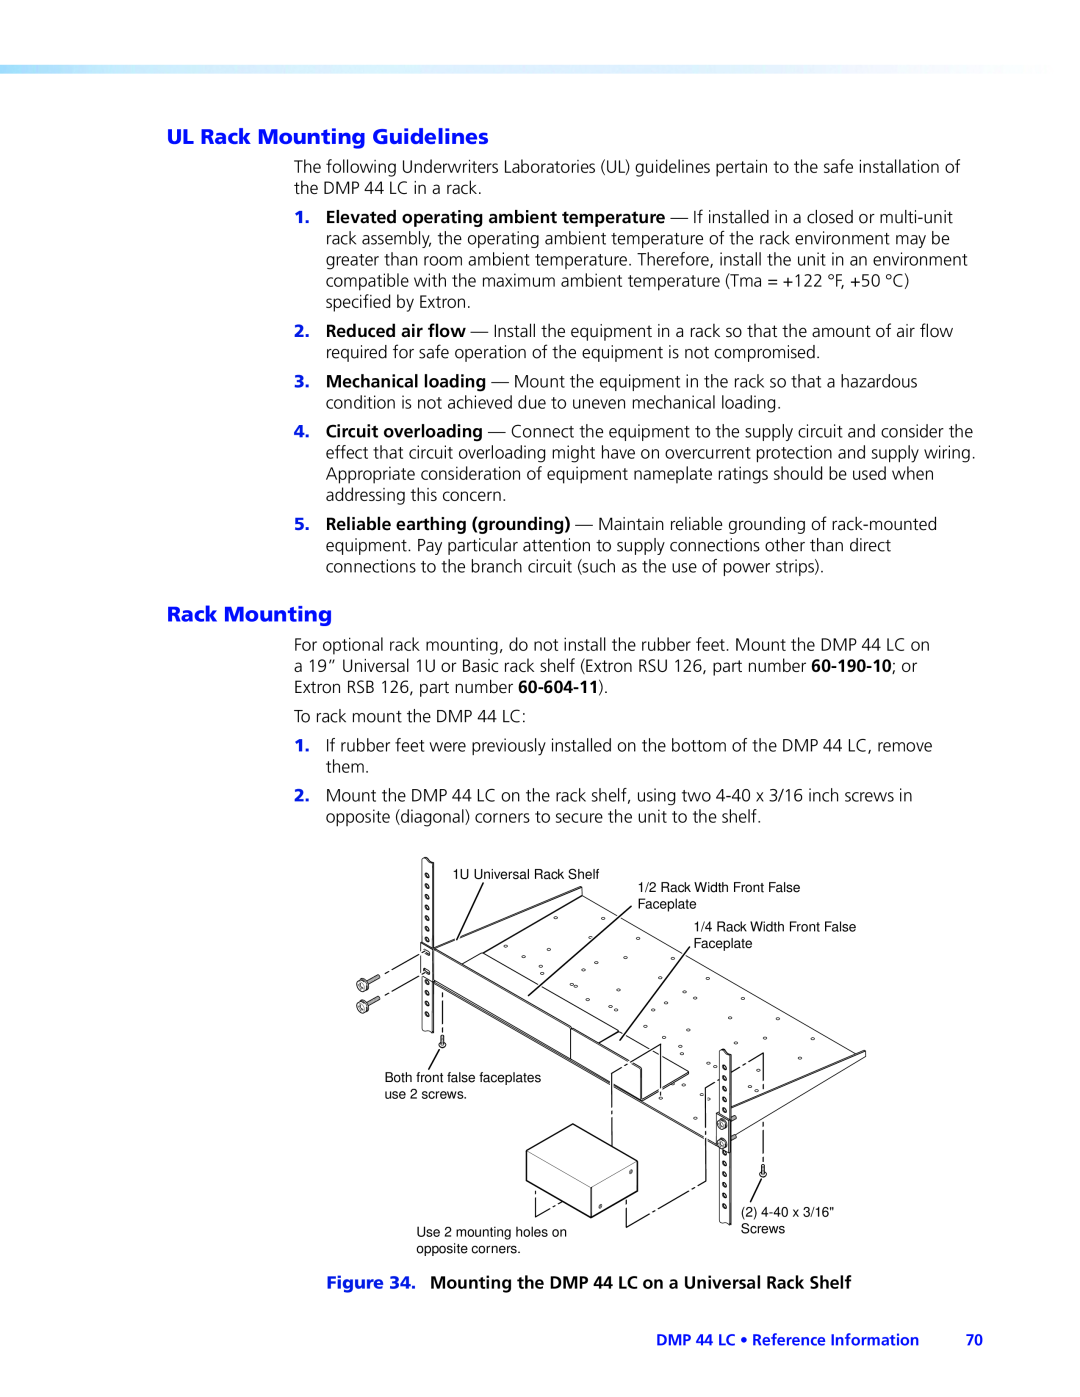 Extron electronic DMP 44 LC manual UL Rack Mounting Guidelines 